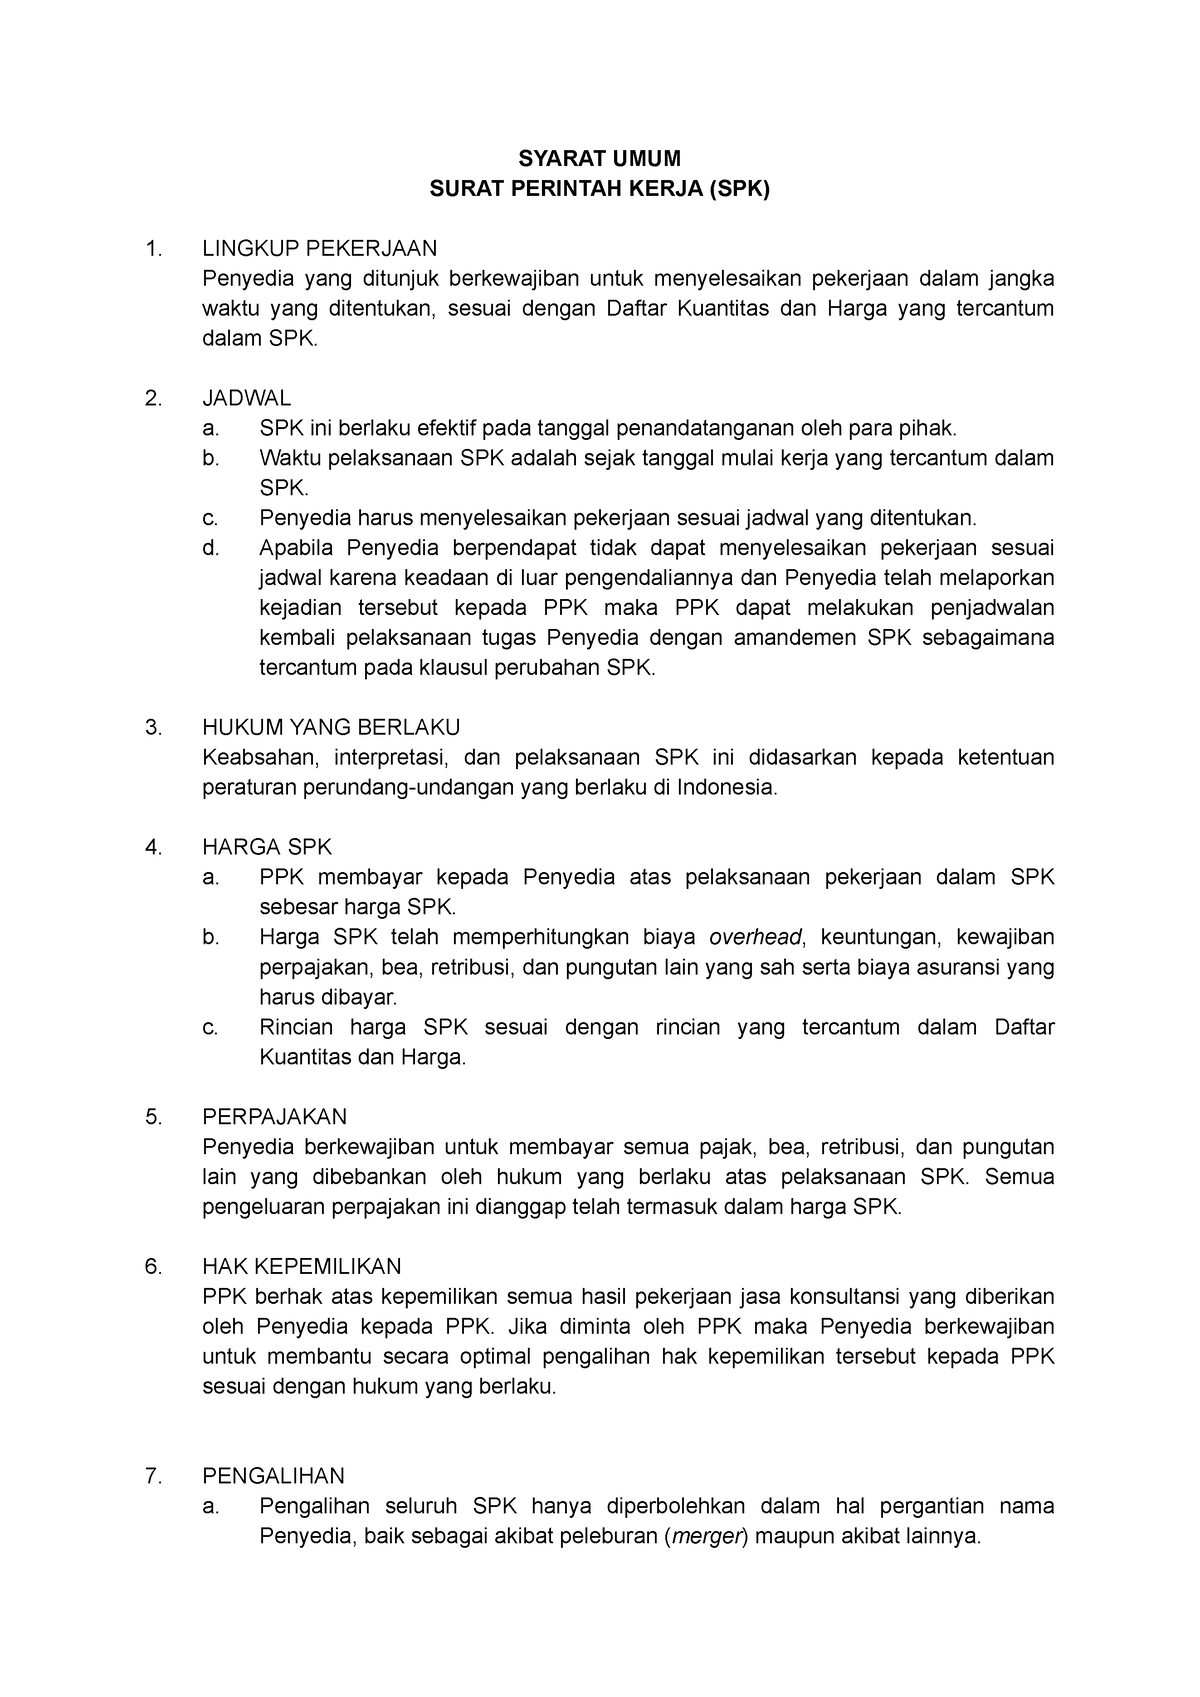 File Ranc Kontrakb  this is an example of a contract that should be